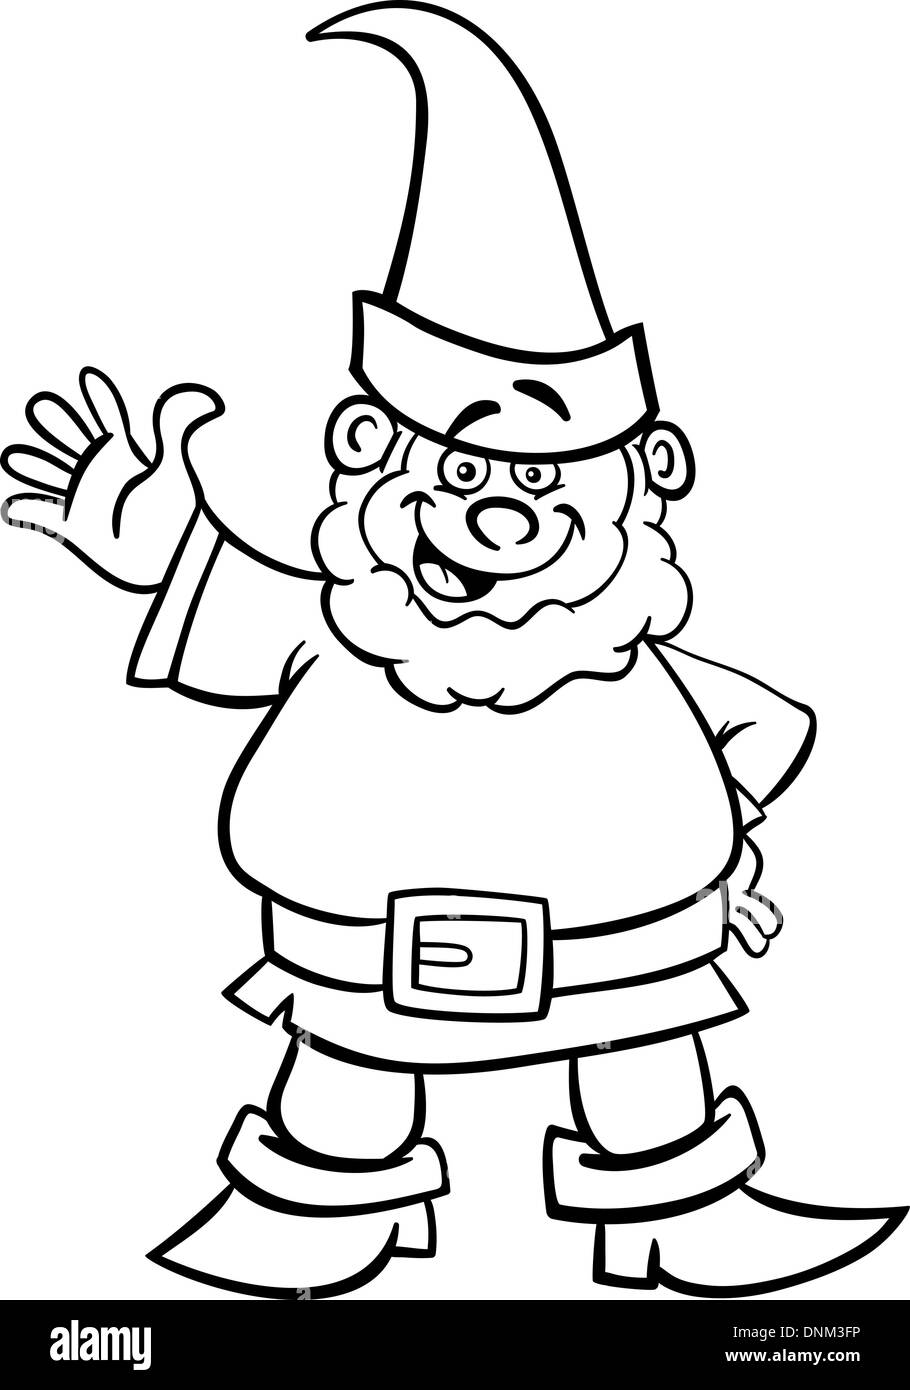 Black and White Cartoon Illustration of Fantasy Gnome or Dwarf for Coloring Book Stock Vector